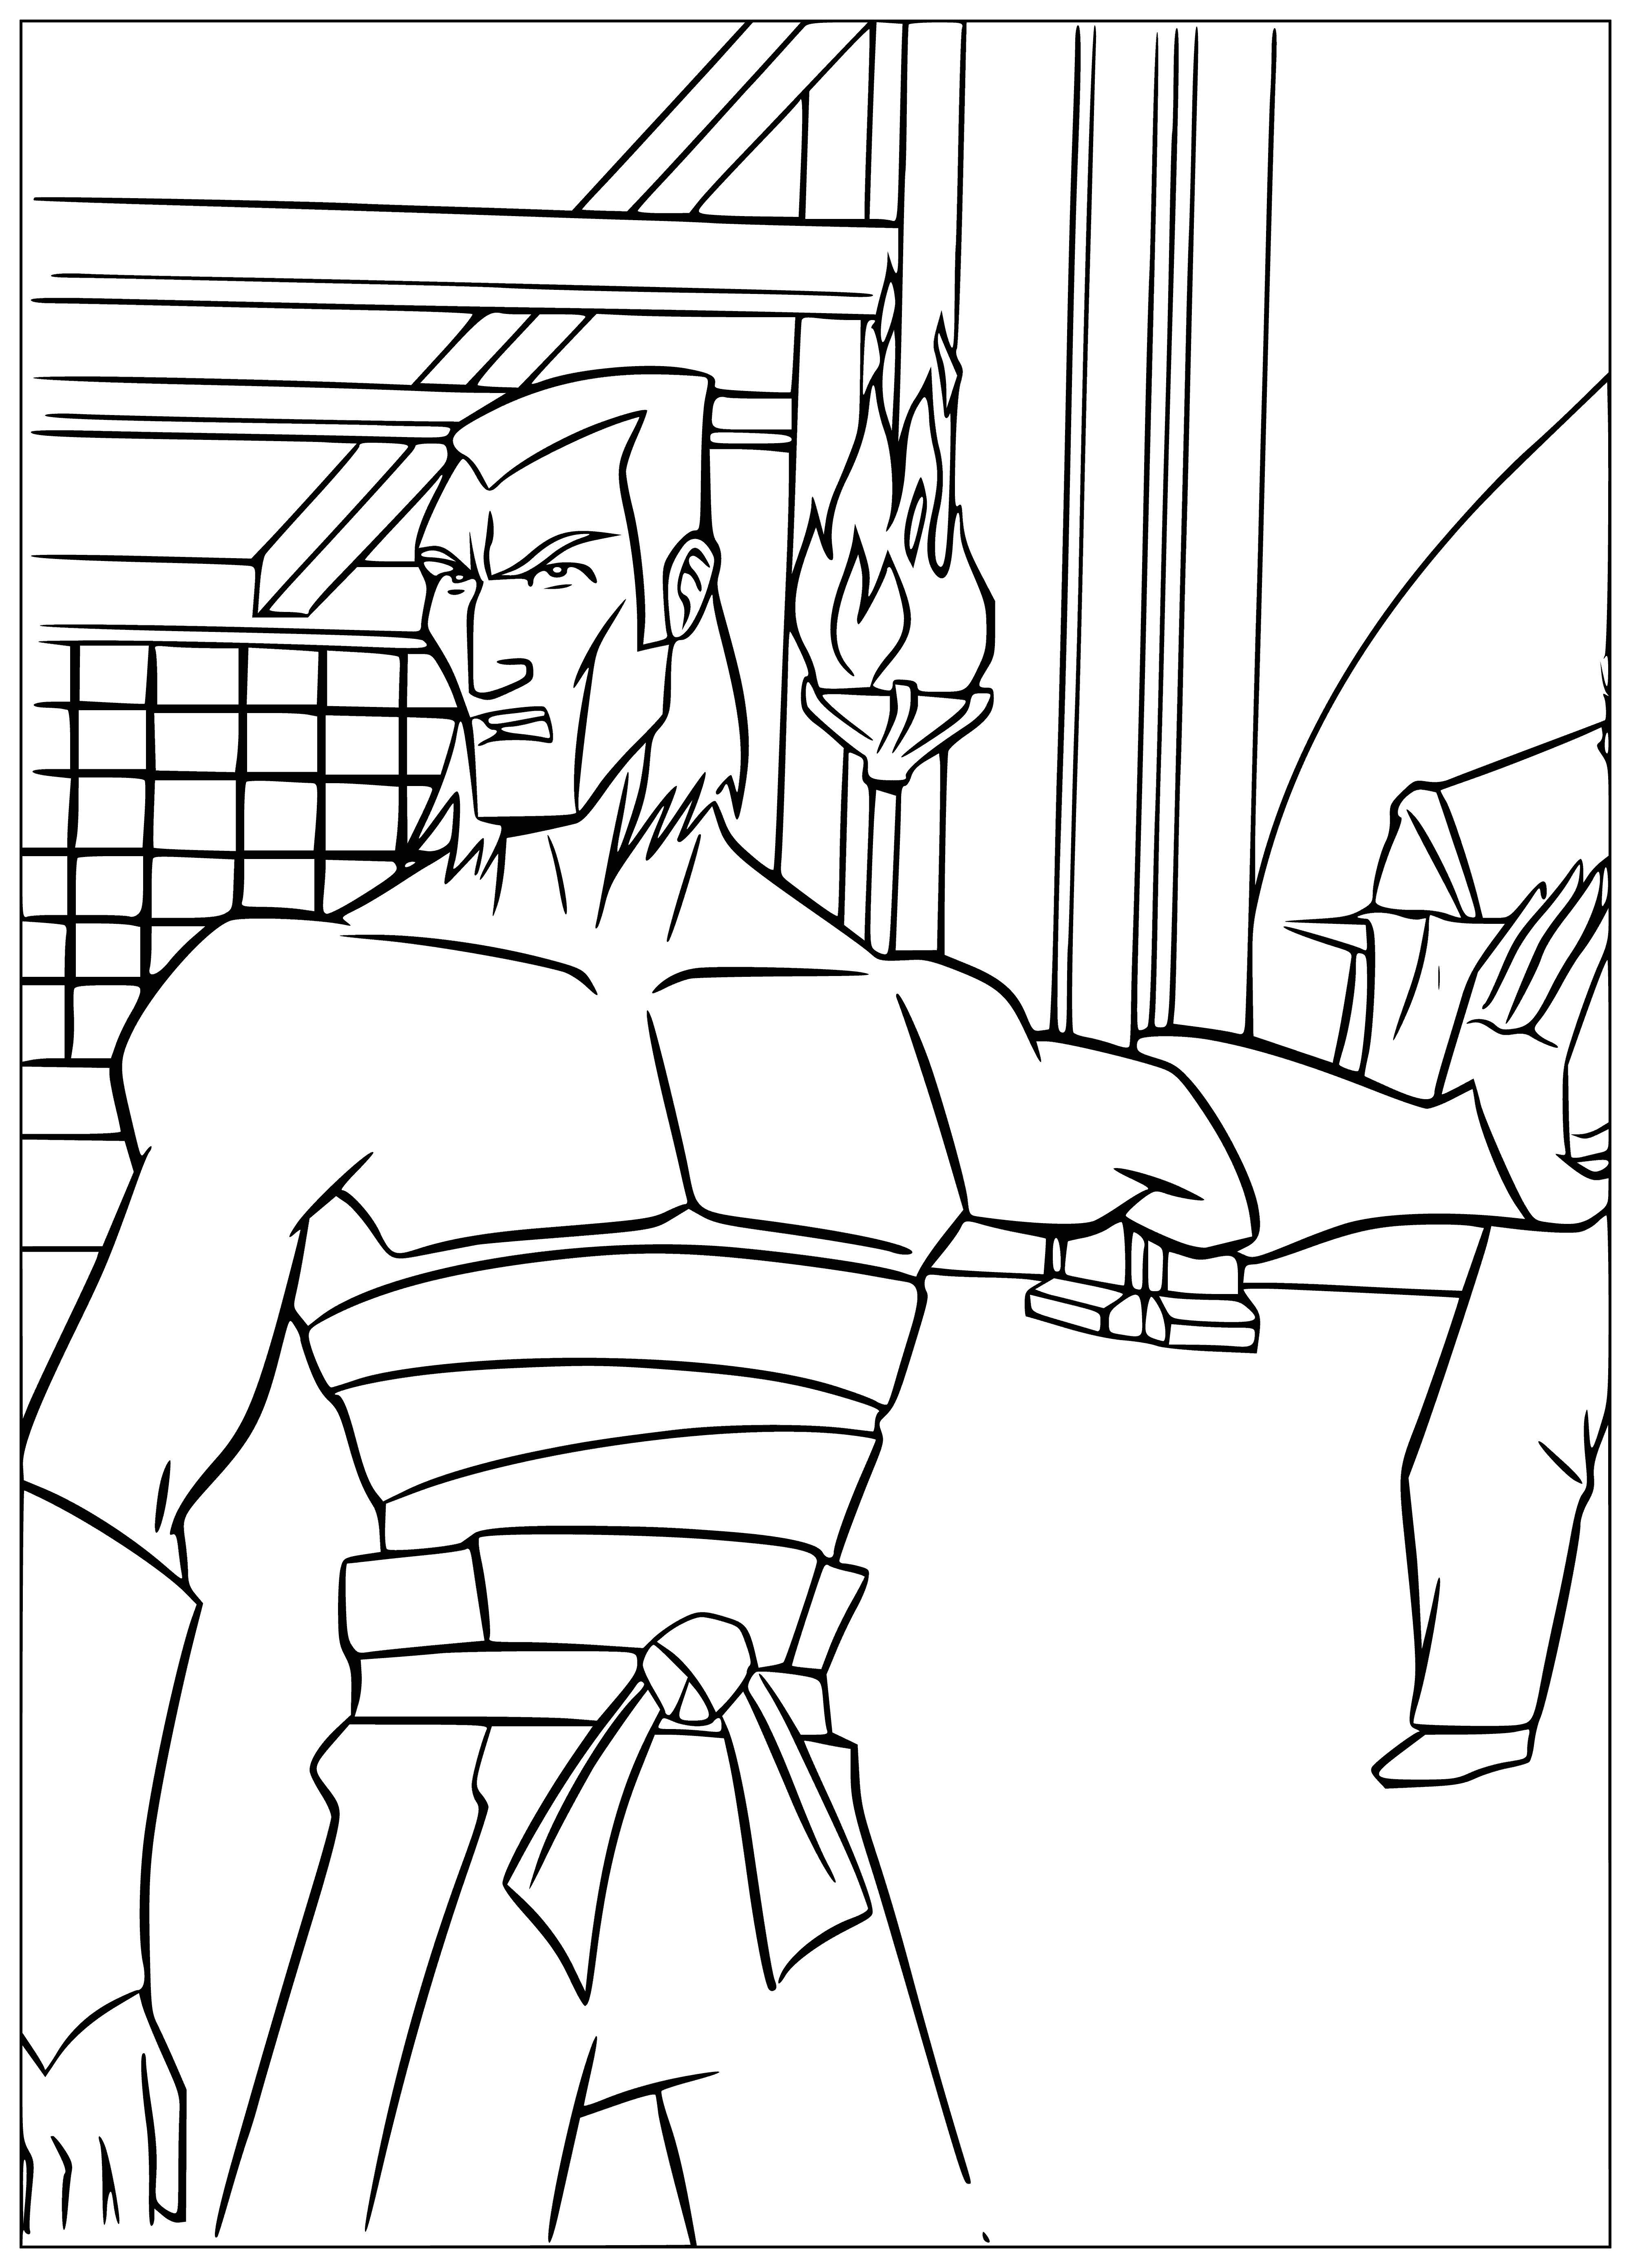 Warrior coloring page